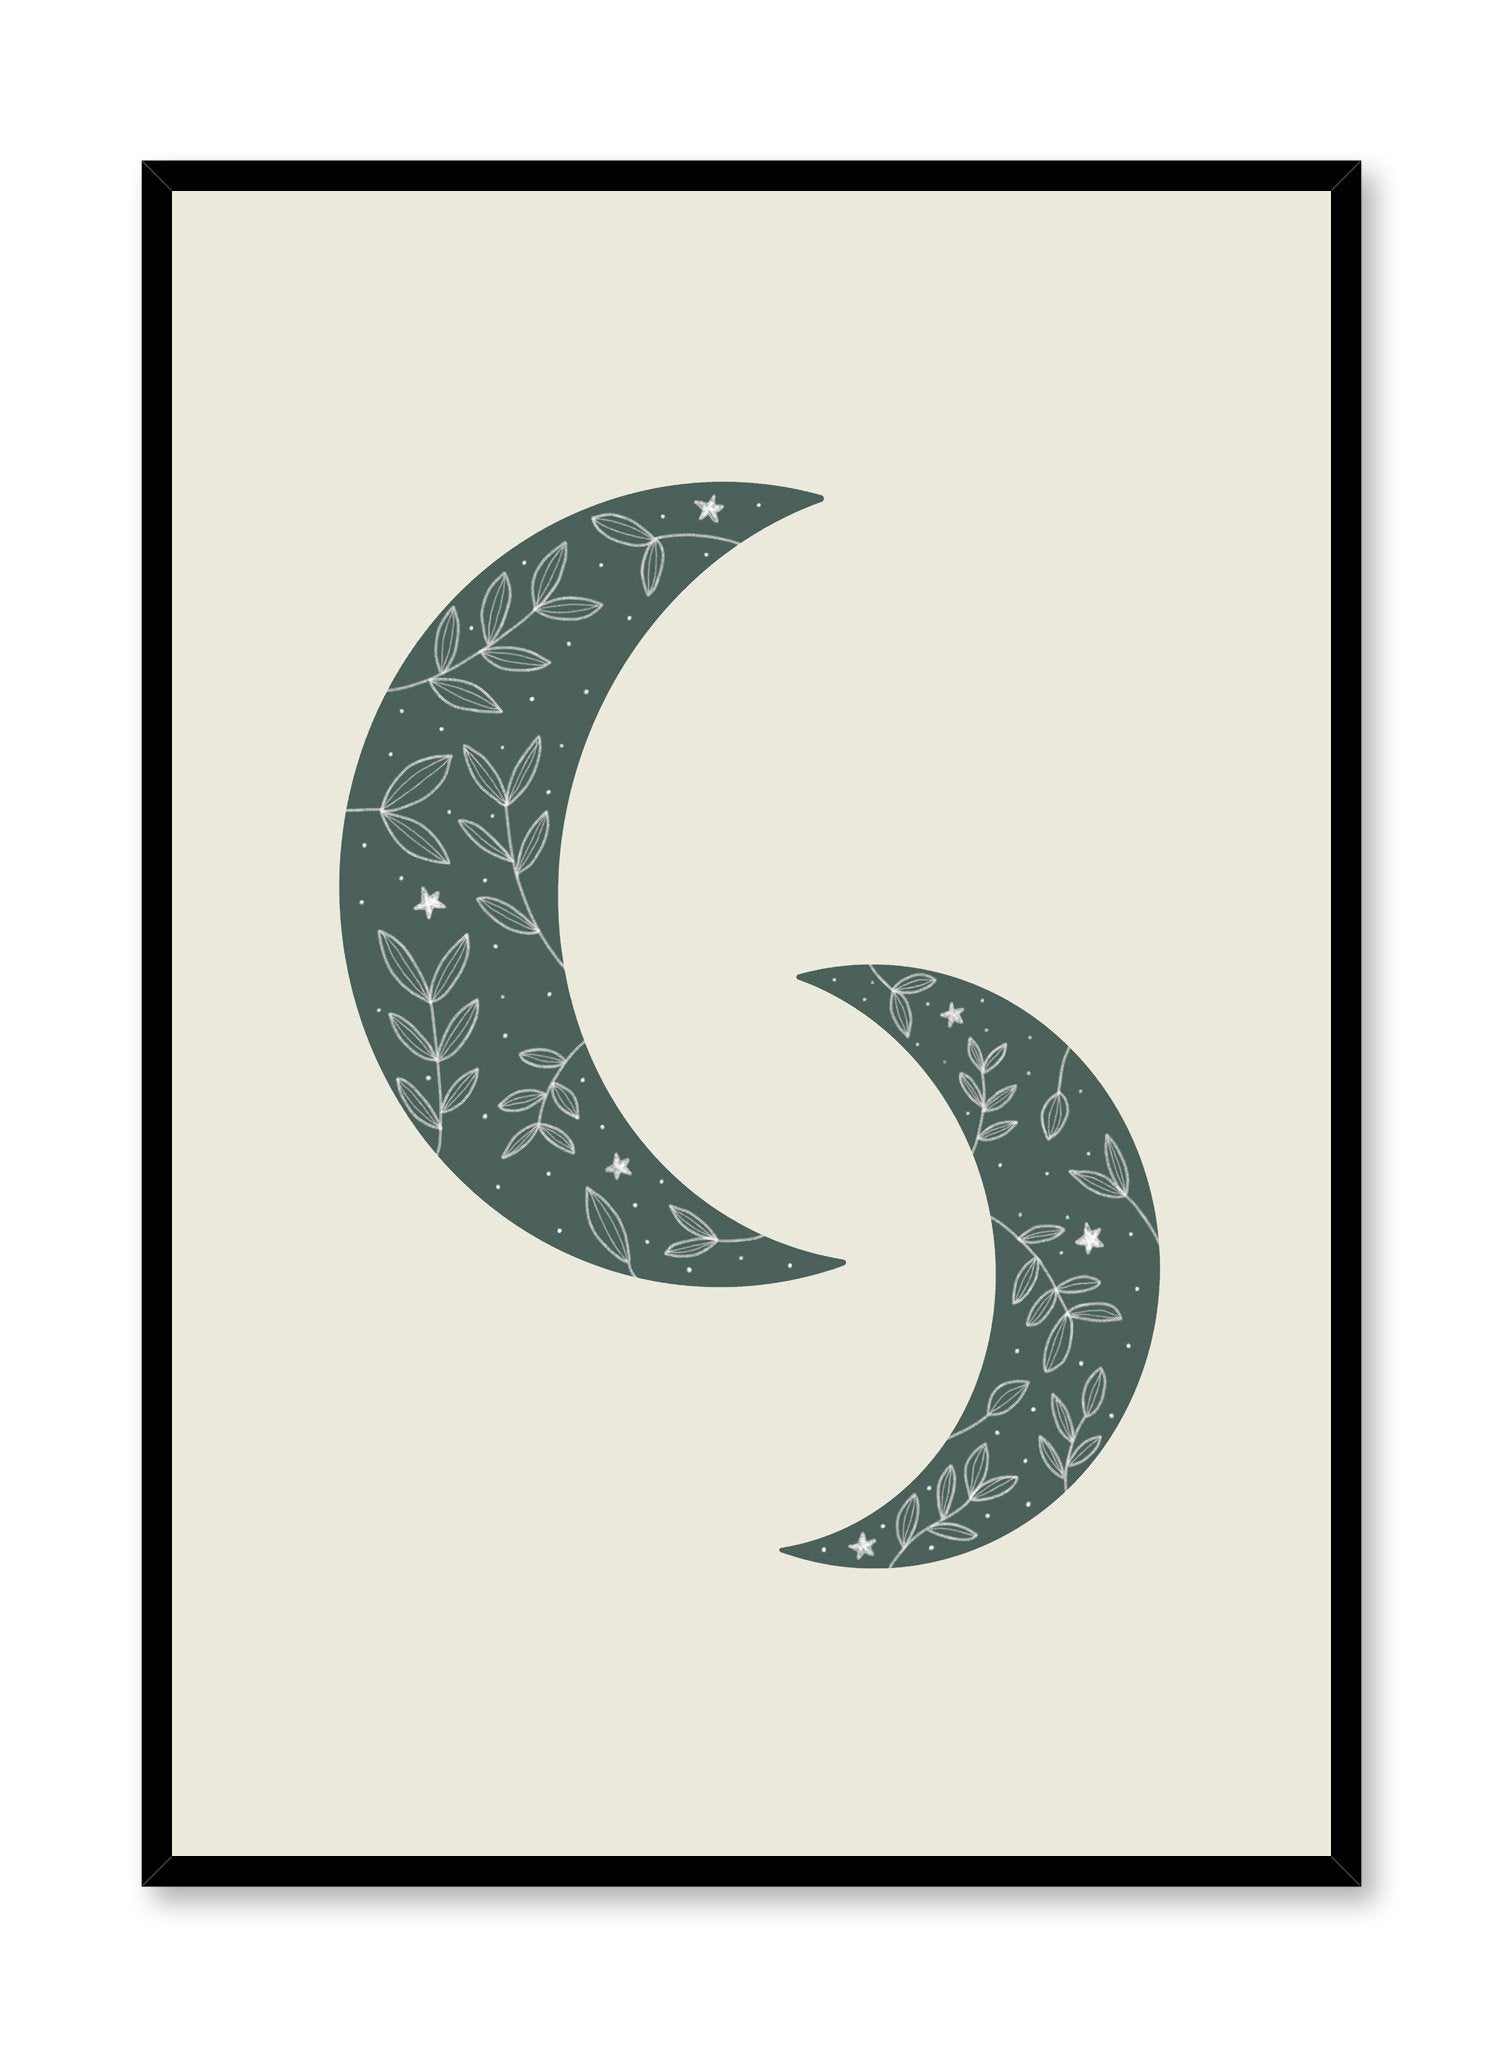 Celestial illustration poster by Opposite Wall with green Floral Moon